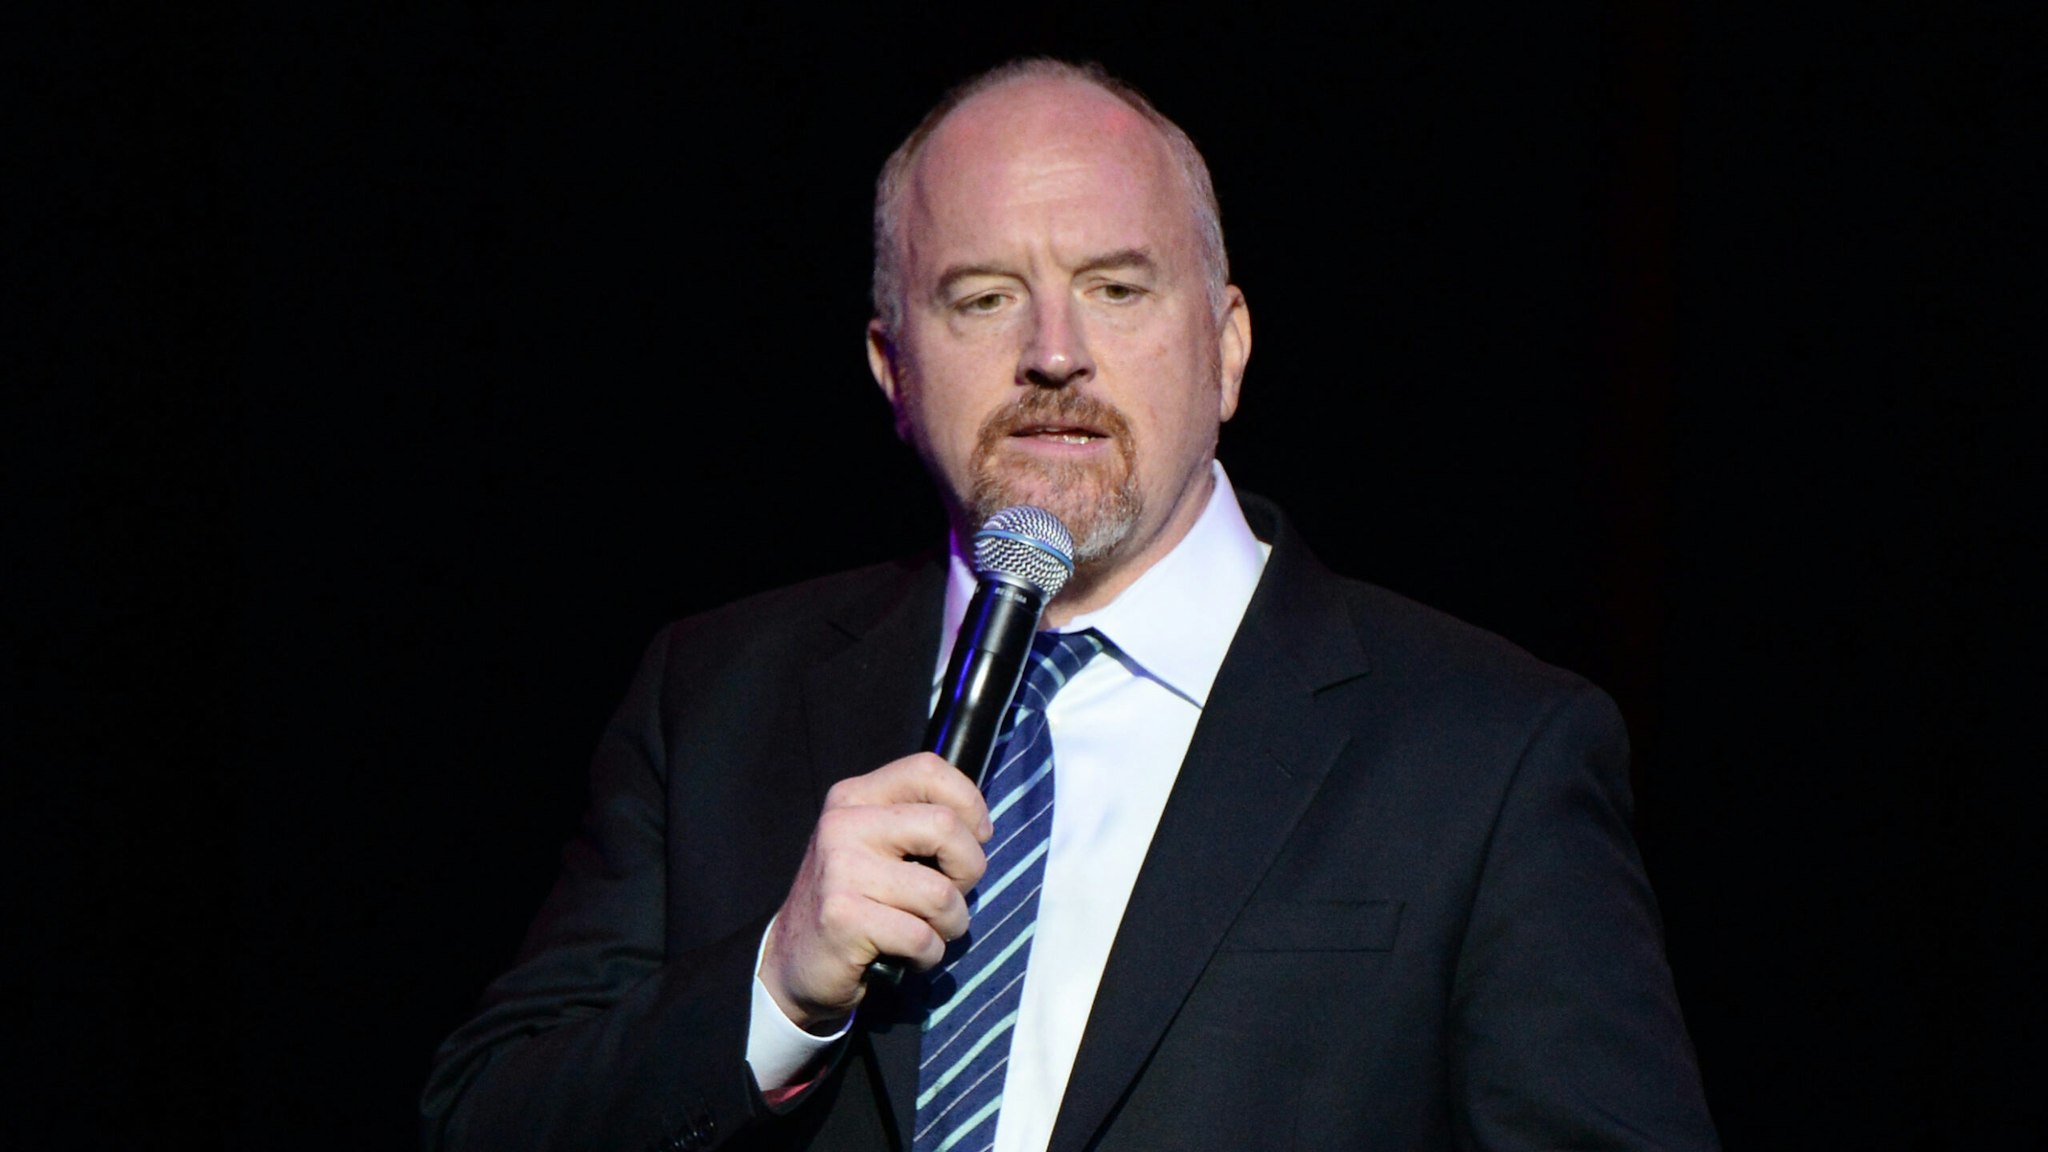 Louis C.K. performs on stage as The New York Comedy Festival and The Bob Woodruff Foundation present the 10th Annual Stand Up for Heroes event at The Theater at Madison Square Garden on November 1, 2016 in New York City.